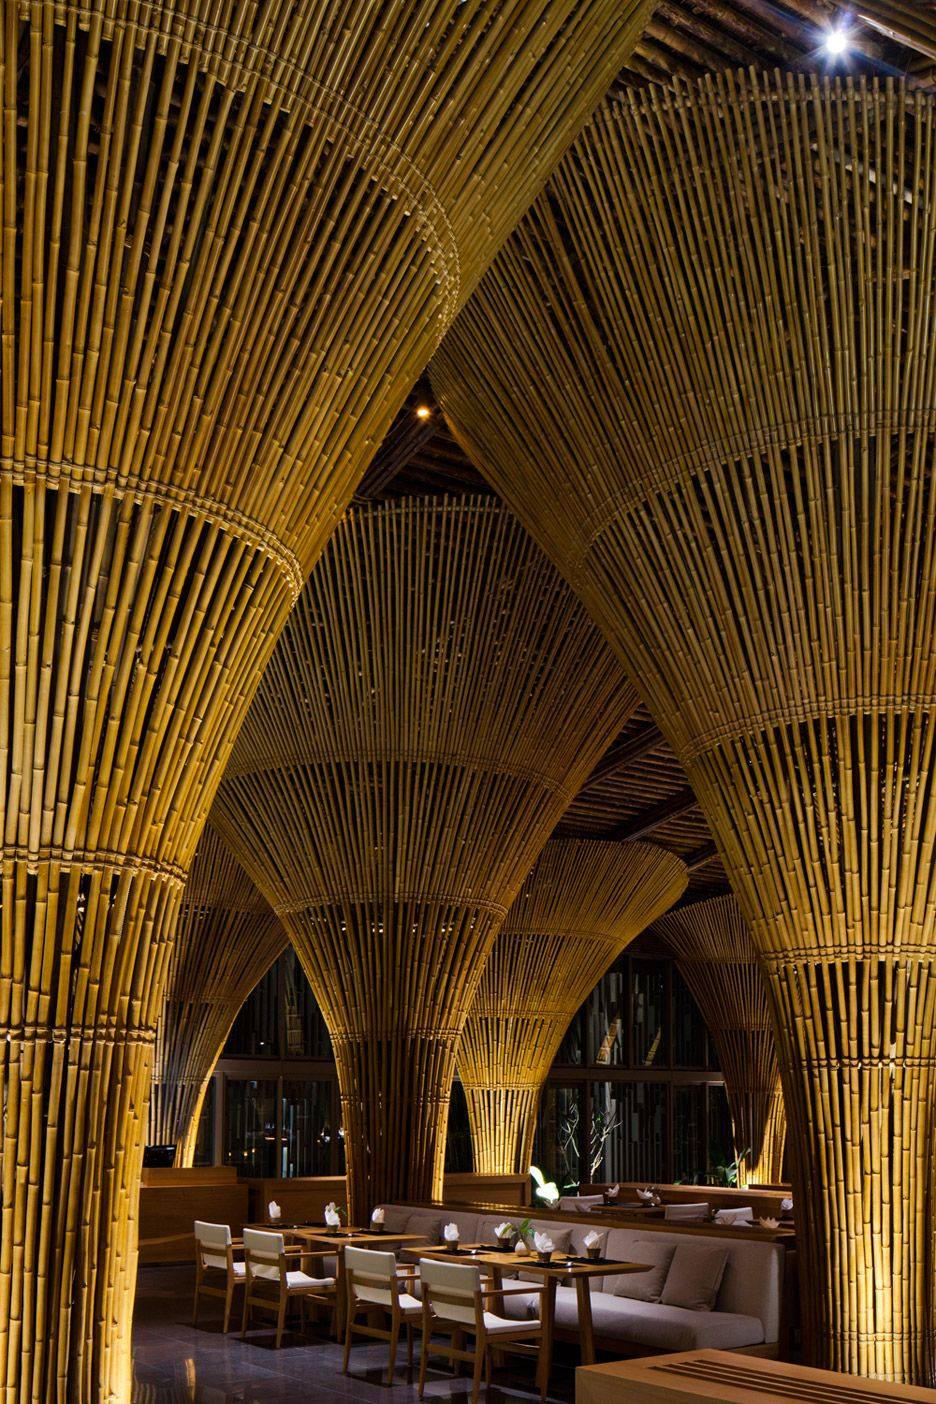 bamboo house design in the philippines bamboo house design bamboo house design in the bamboo house